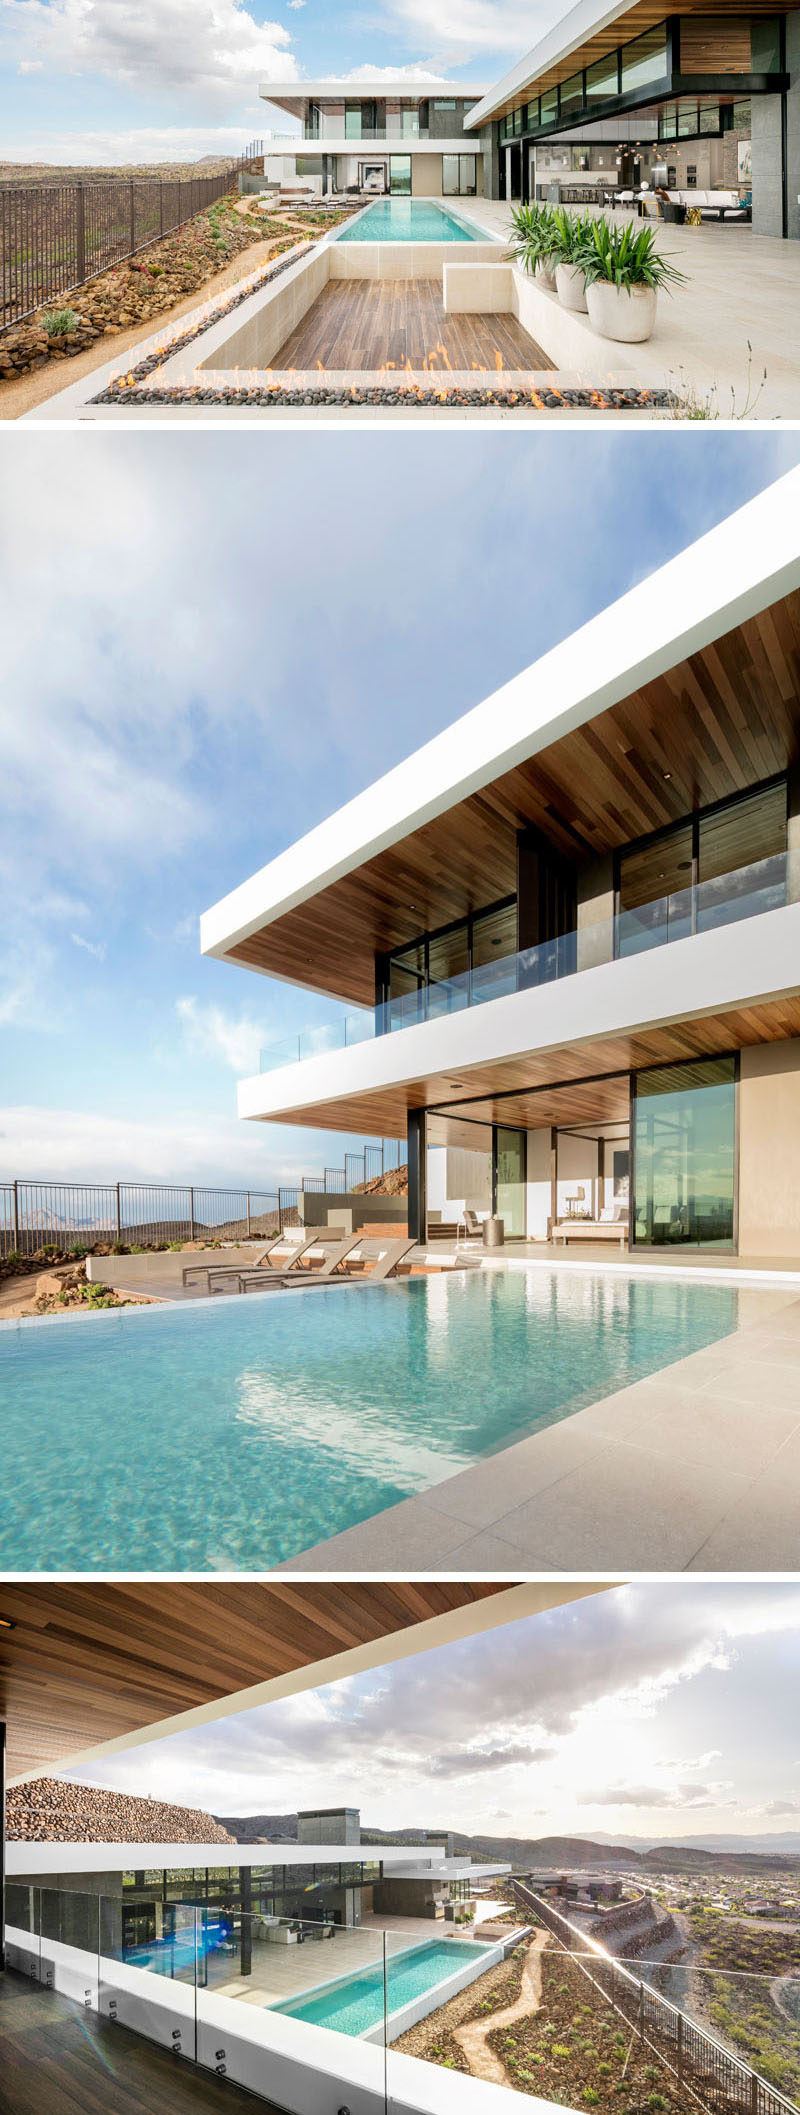 This modern house has a large outdoor entertaining area next to the swimming pool, while a sunken area perfect for a few couches is surrounded by an outdoor fireplace.